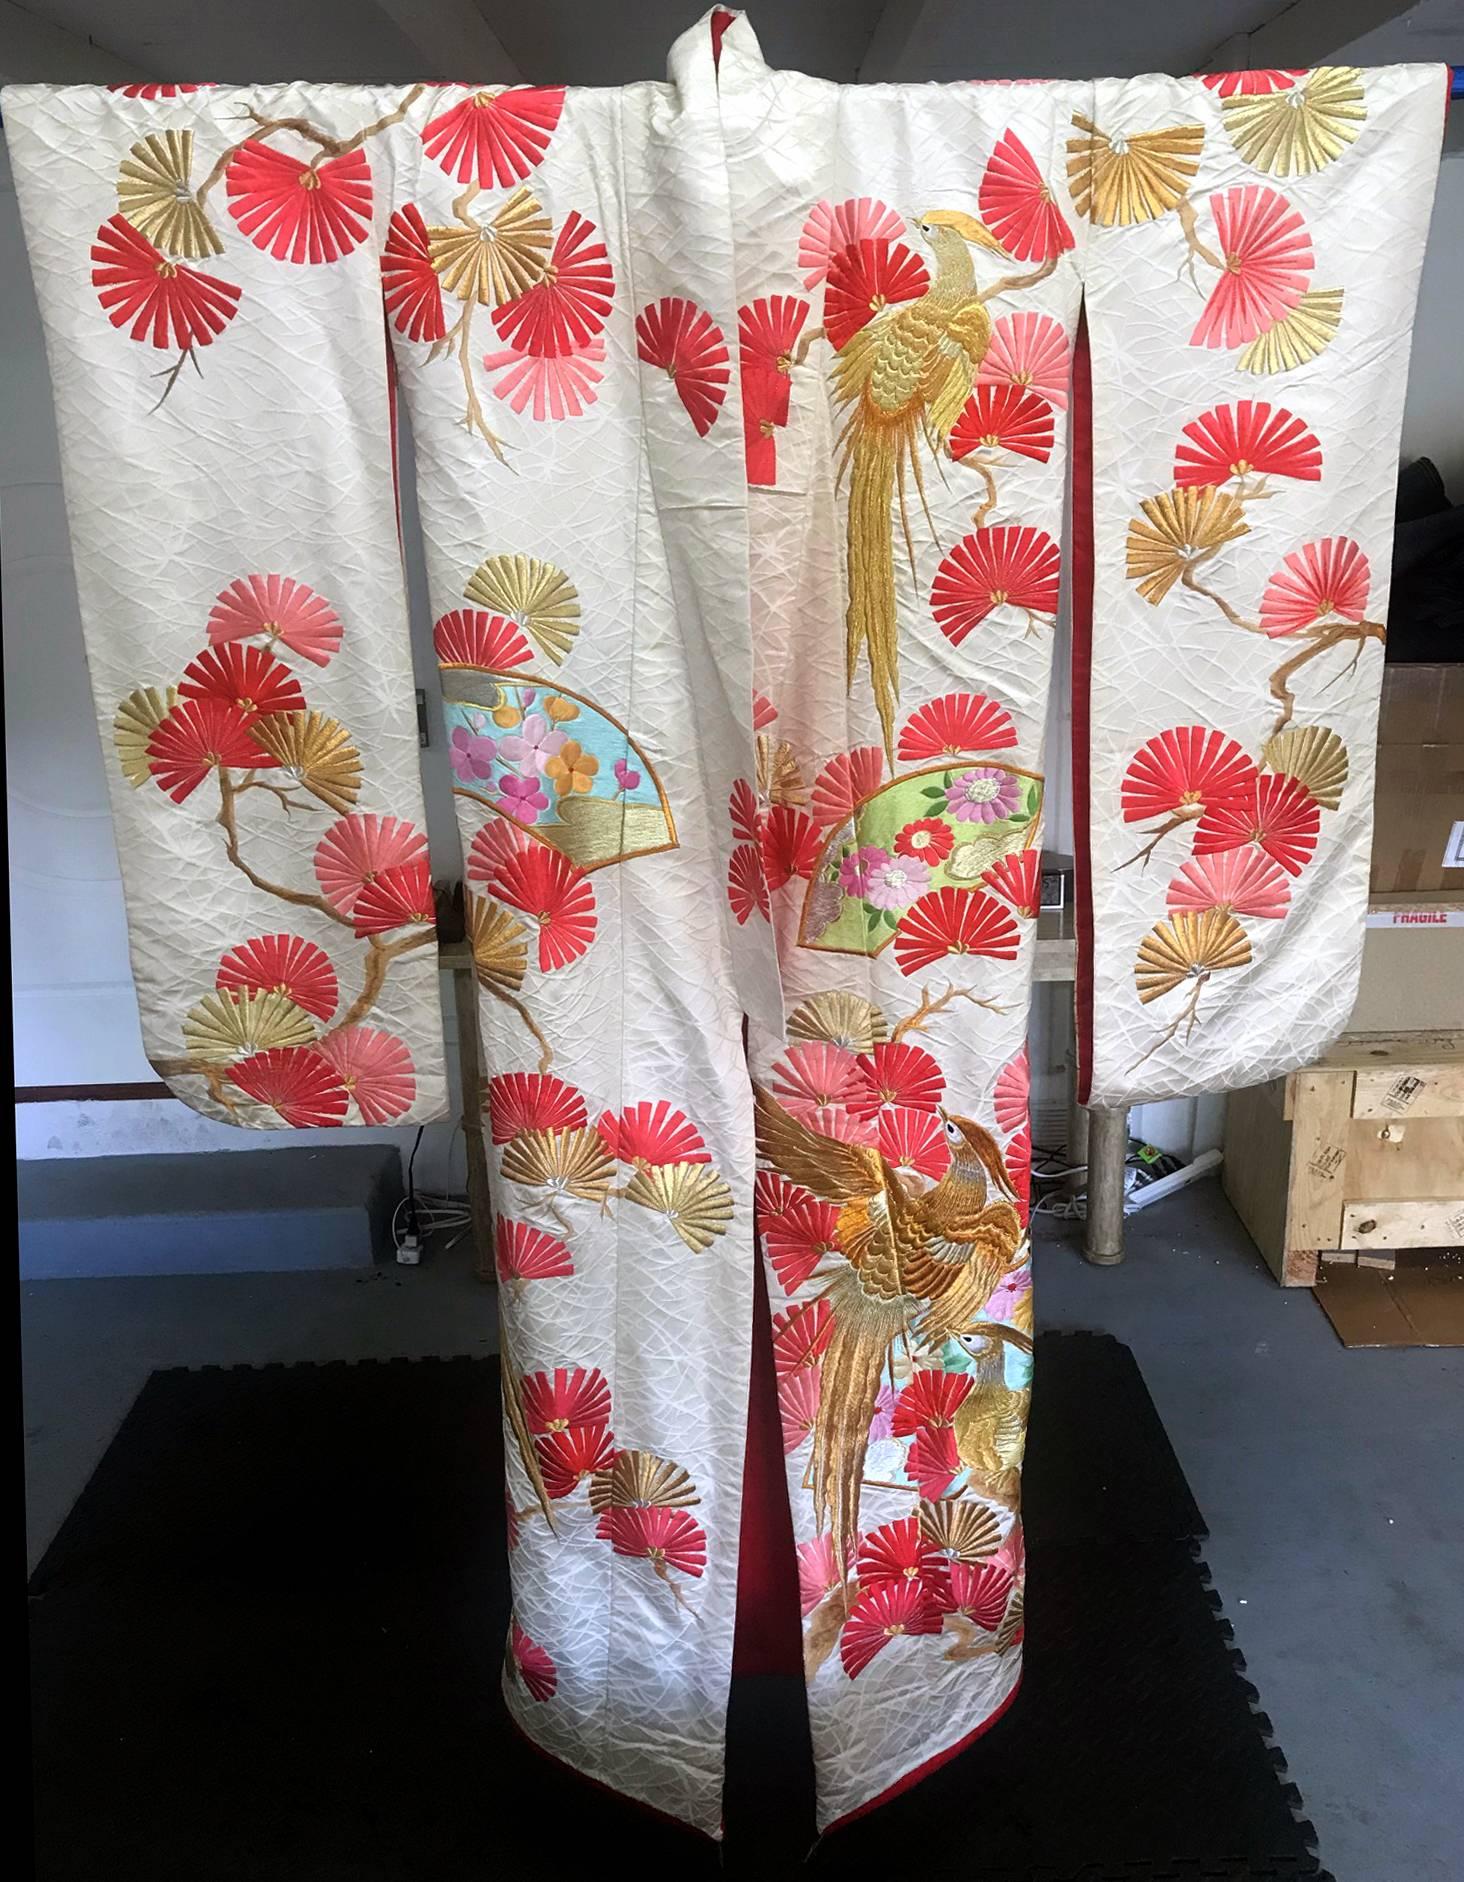 A truly beautiful Japanese ceremonial kimono, circa 1930-60s in an oriental Art Deco style. White silk textured background with elaborate and intricate embroidery in colors, silver and gold threads. The front and the back of the kimono depict